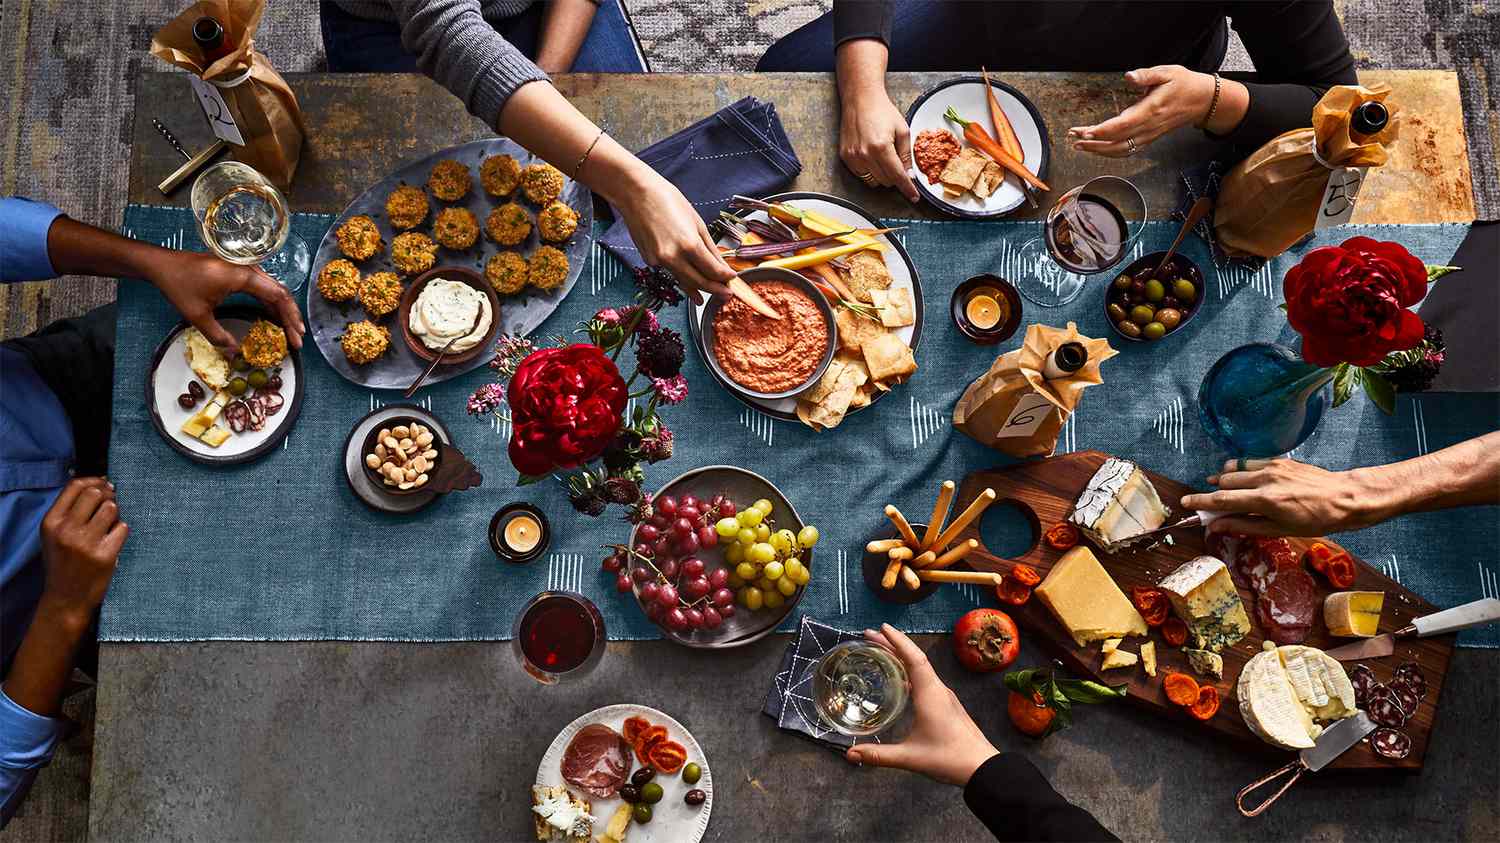 Party With a Purpose Recipes | Real Simple March 2020